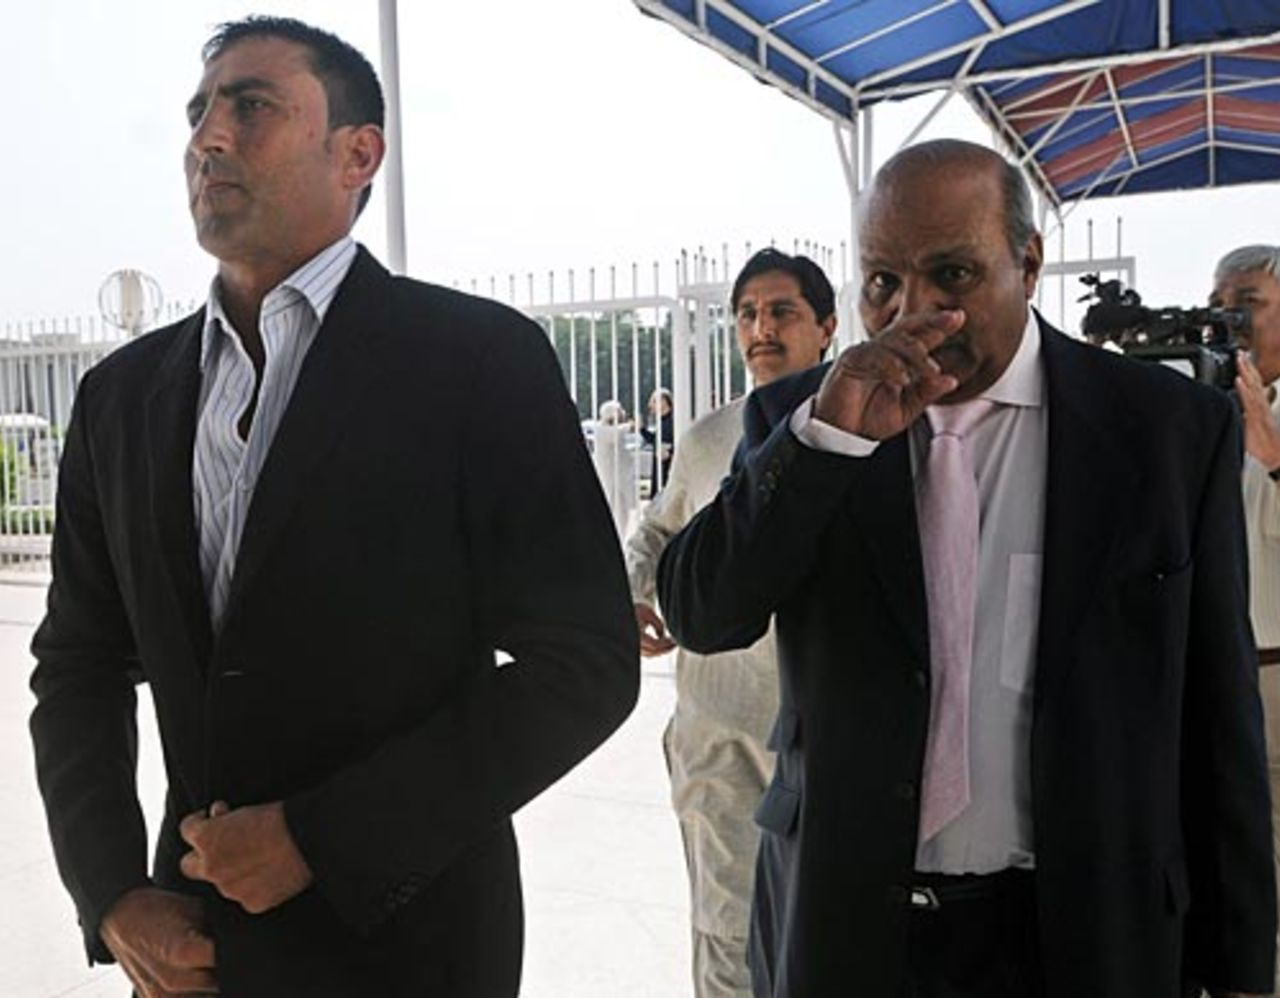 Younis Khan arrives, ready to resign as Pakistan captain, Islamabad, October 13, 2009 